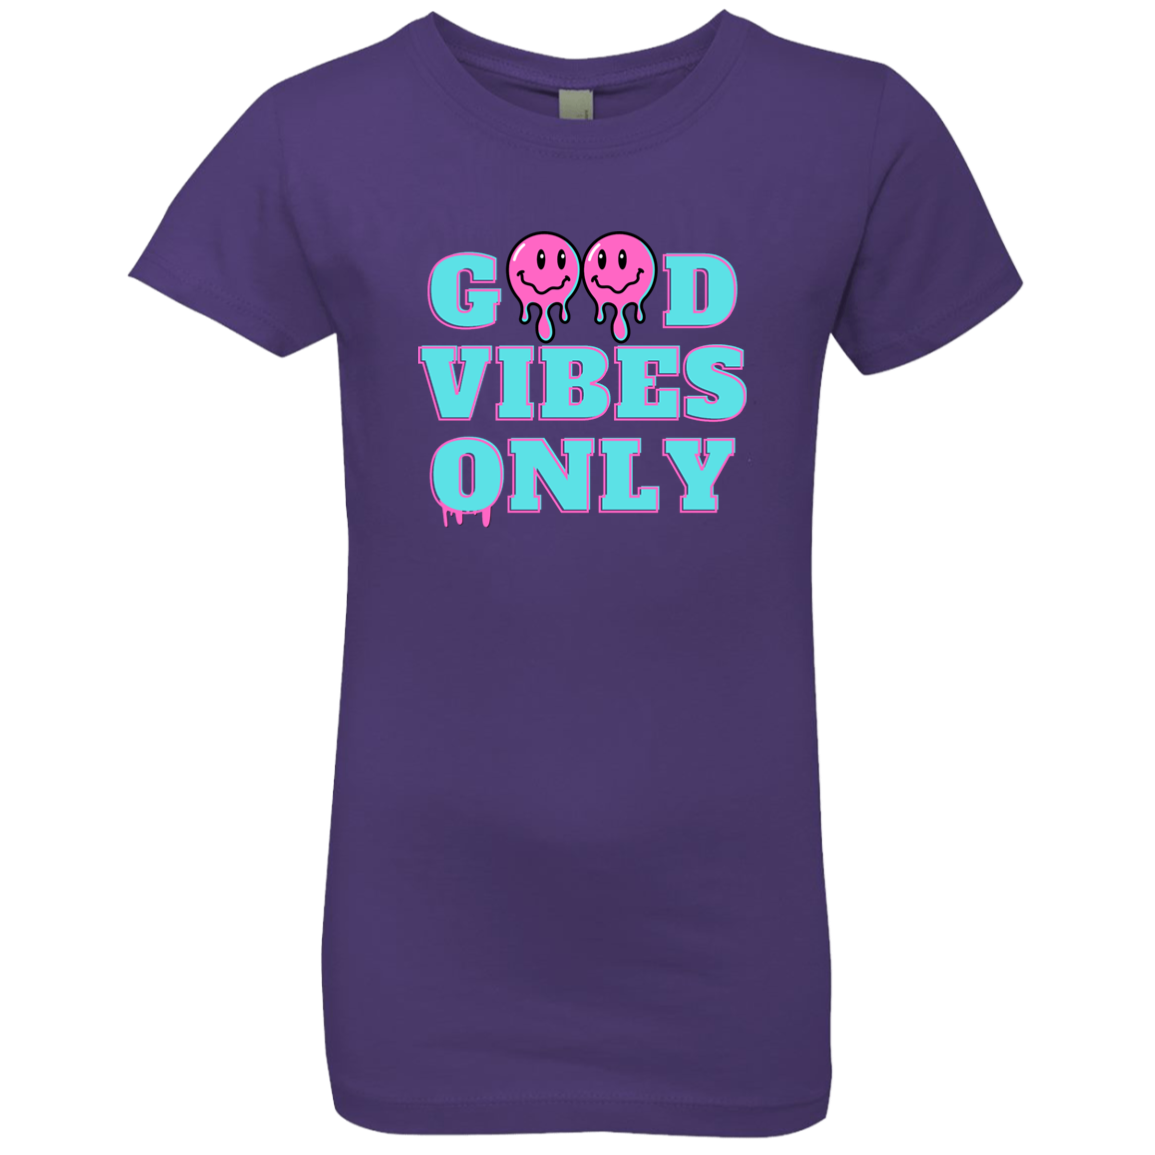 Good Vibes Only - Girls', Teen, Youth T-Shirt